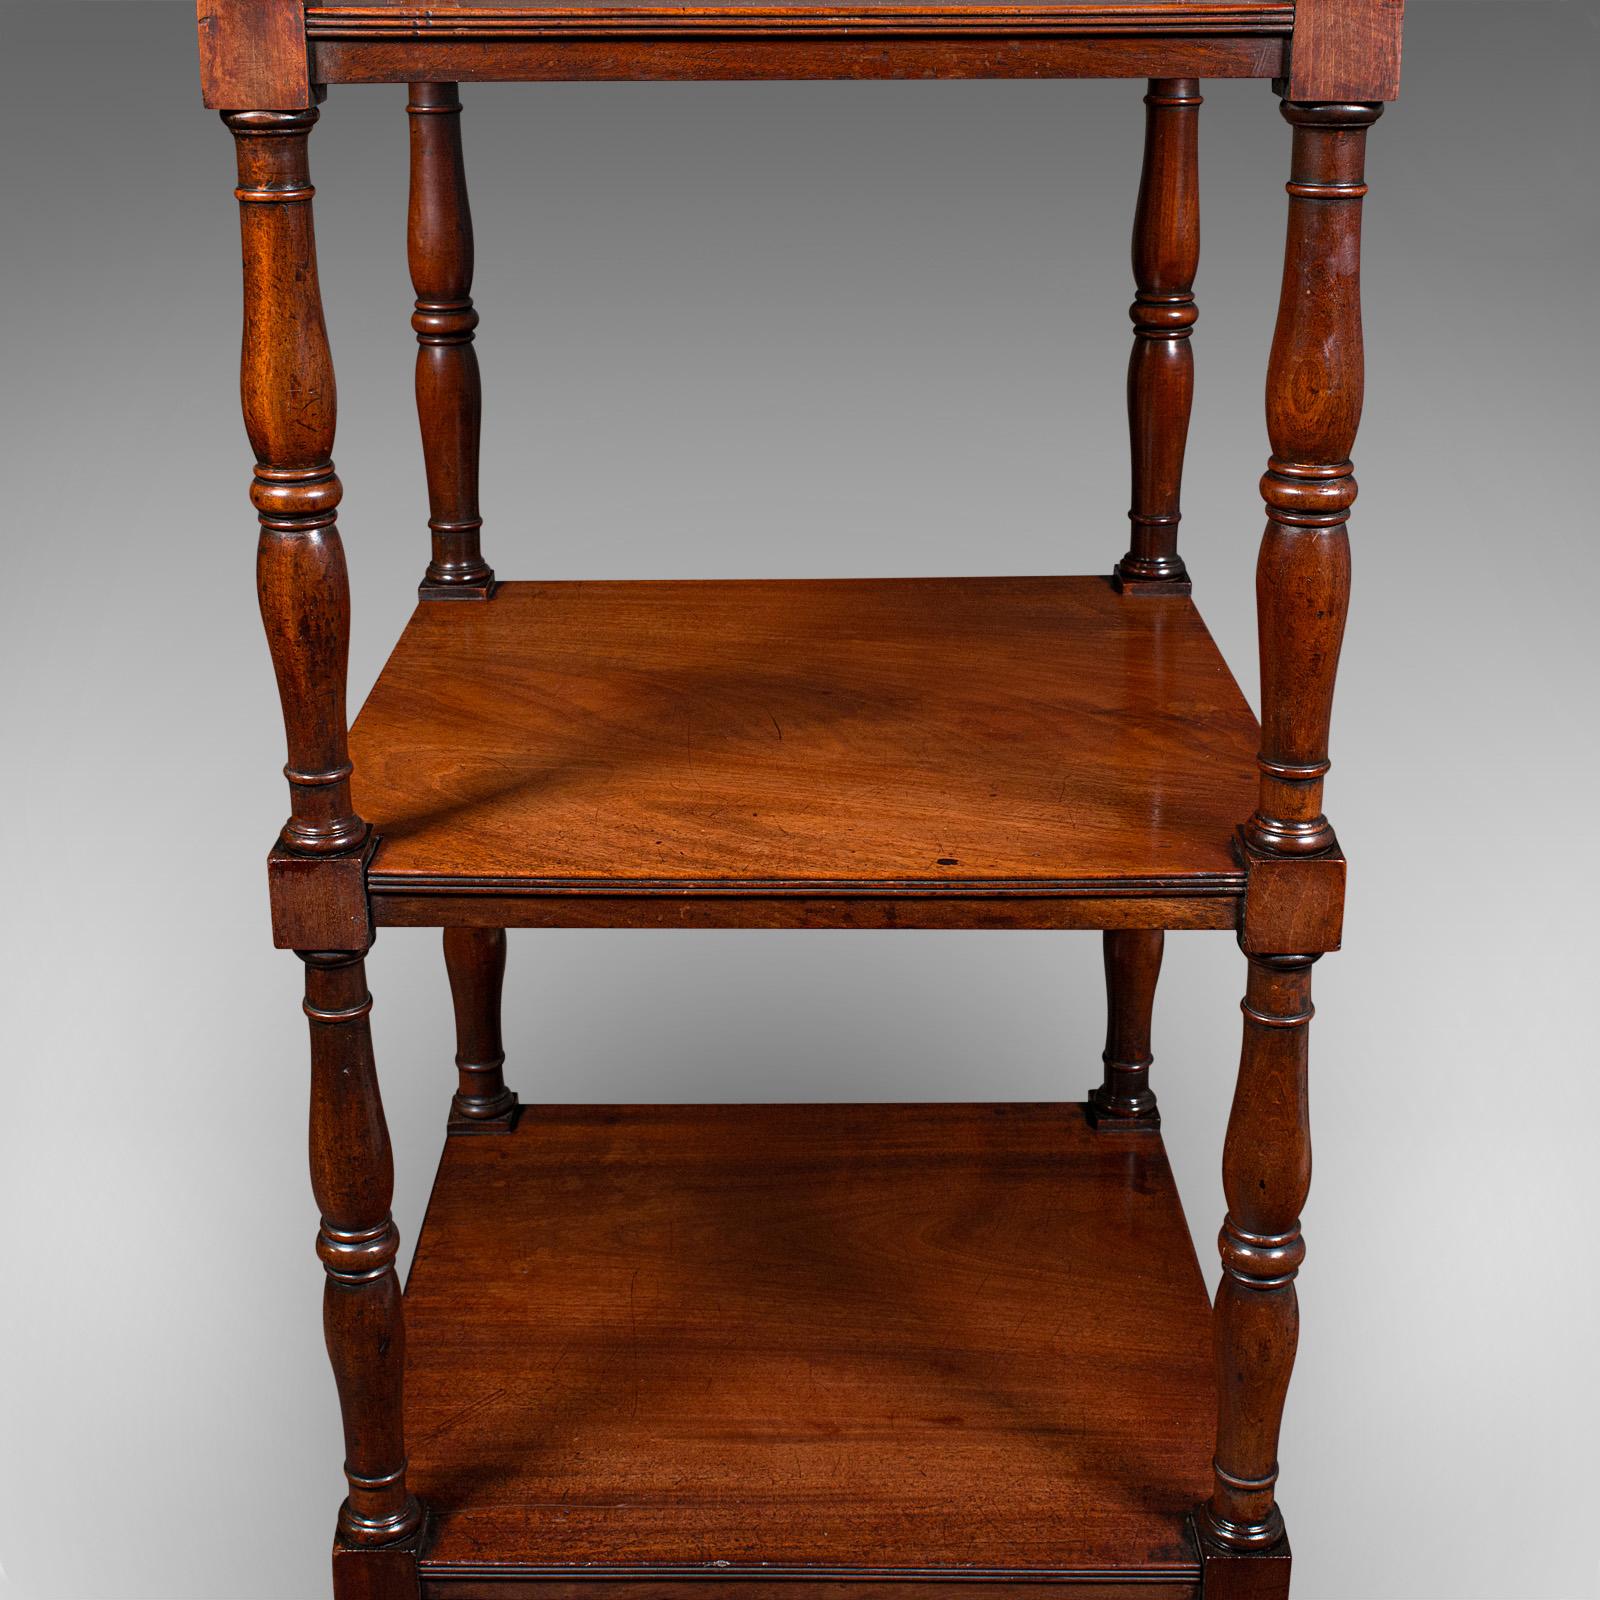 Antique 3 Tier Whatnot, English, Open Display Stand, Late Georgian, Circa 1800 For Sale 2